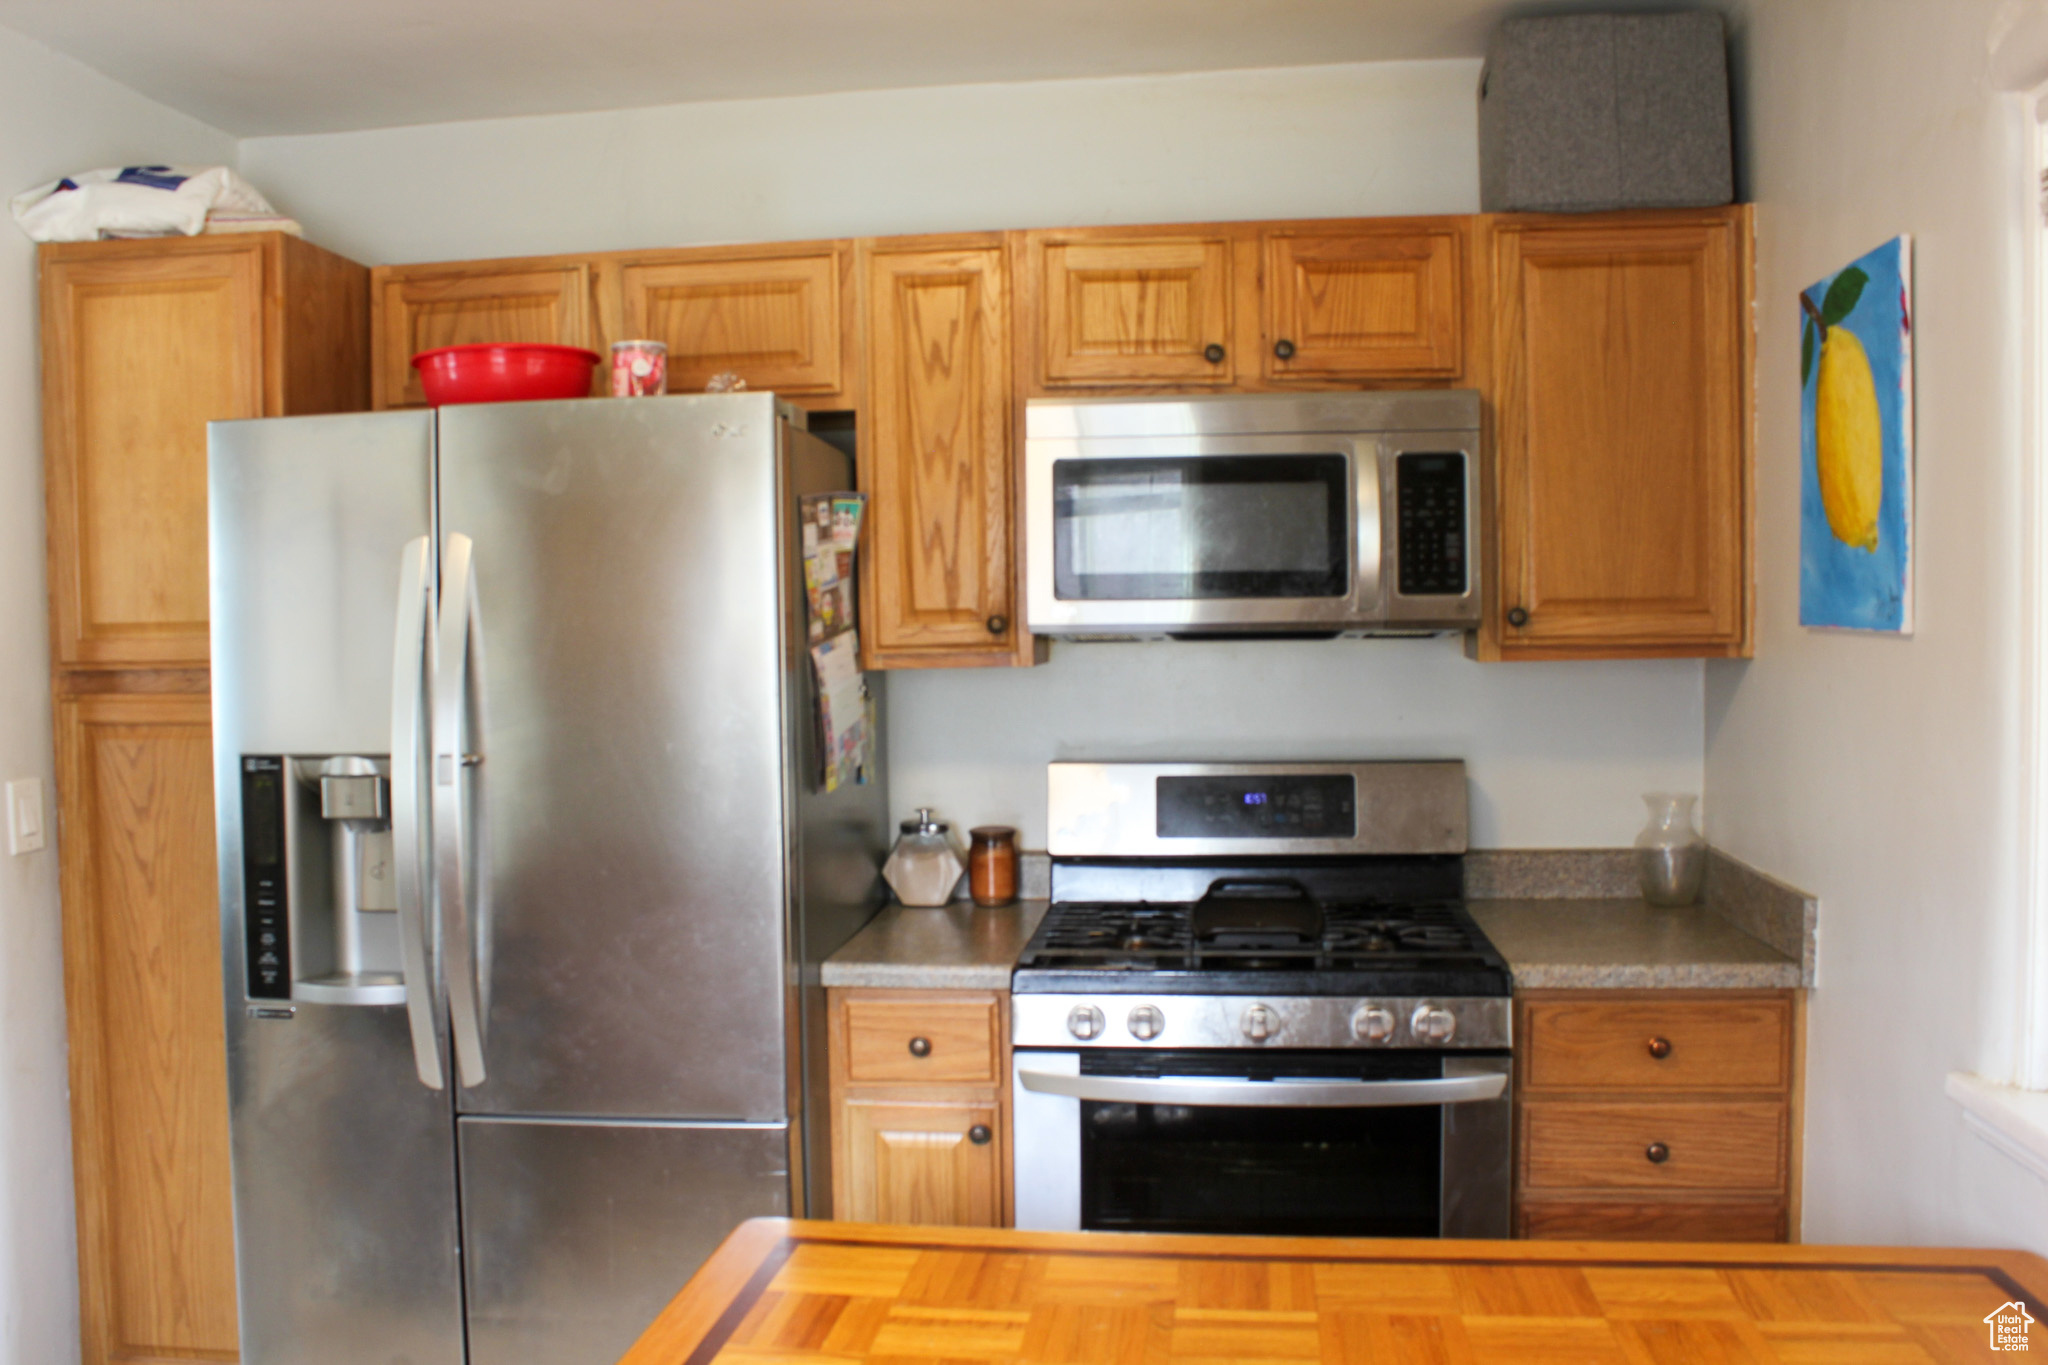 Kitchen featuring appliances with stainless steel finishes, wooden counters, and parquet flooring